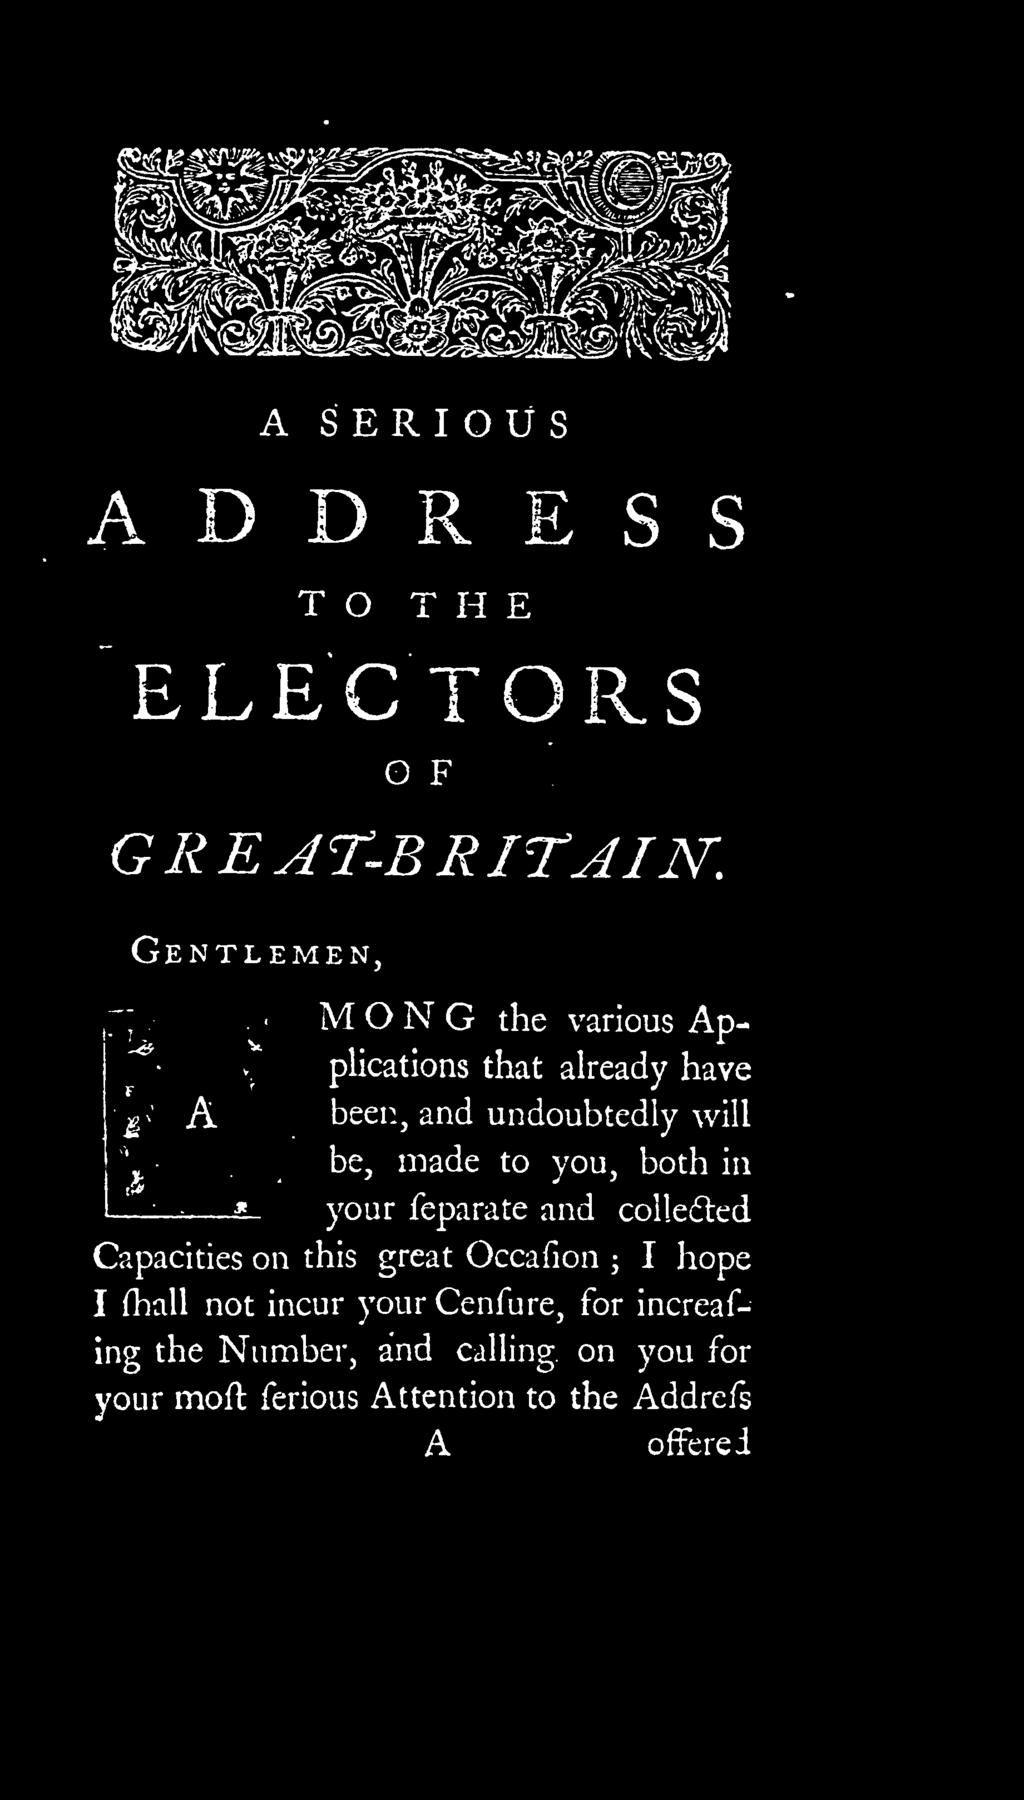 A SERIOUS ADDRESS TO THE ELECTORS O F GREAT-ER ITAIN. Gentlemen, M O N G the various Applications that already have beer.